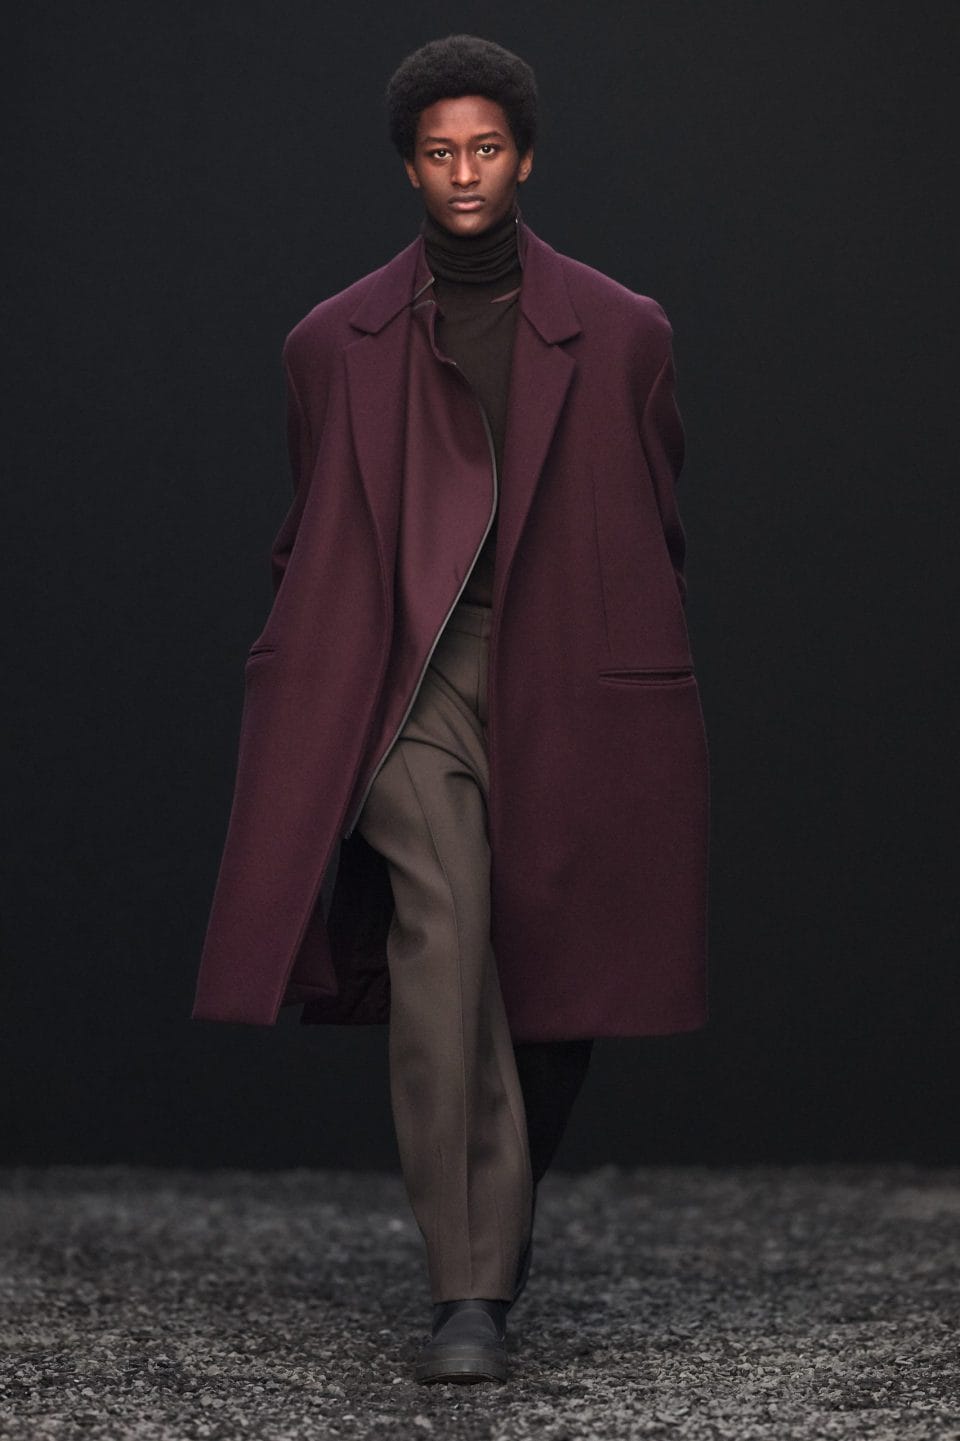 The Zegna Winter 2022 Show is Rooted In Reality